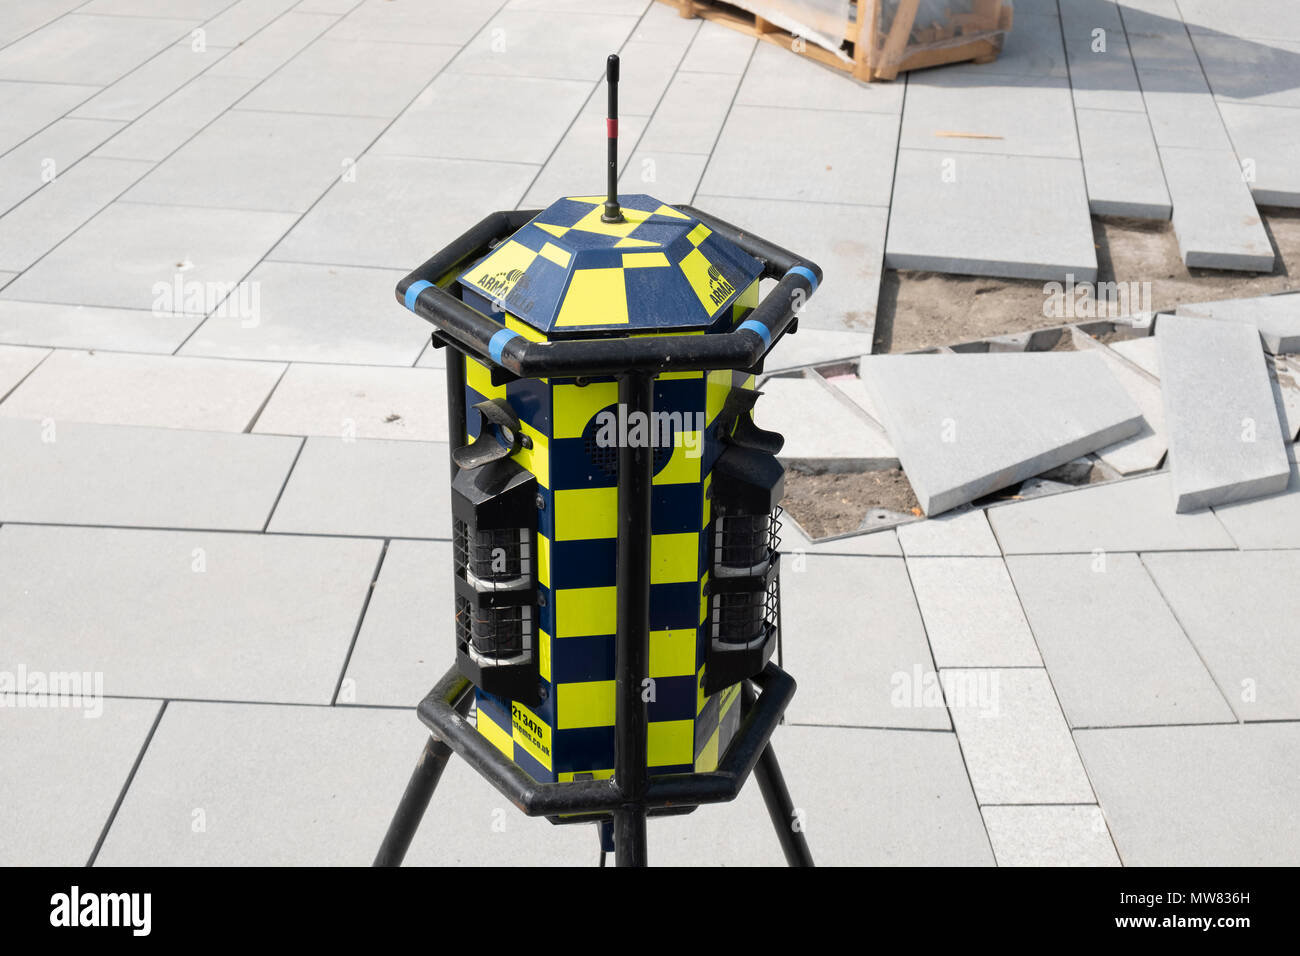 Armadillo perimeter intruder detection system at a construction site in the UK. The system is an armoured battery powered intruder / theft alarm syste Stock Photo